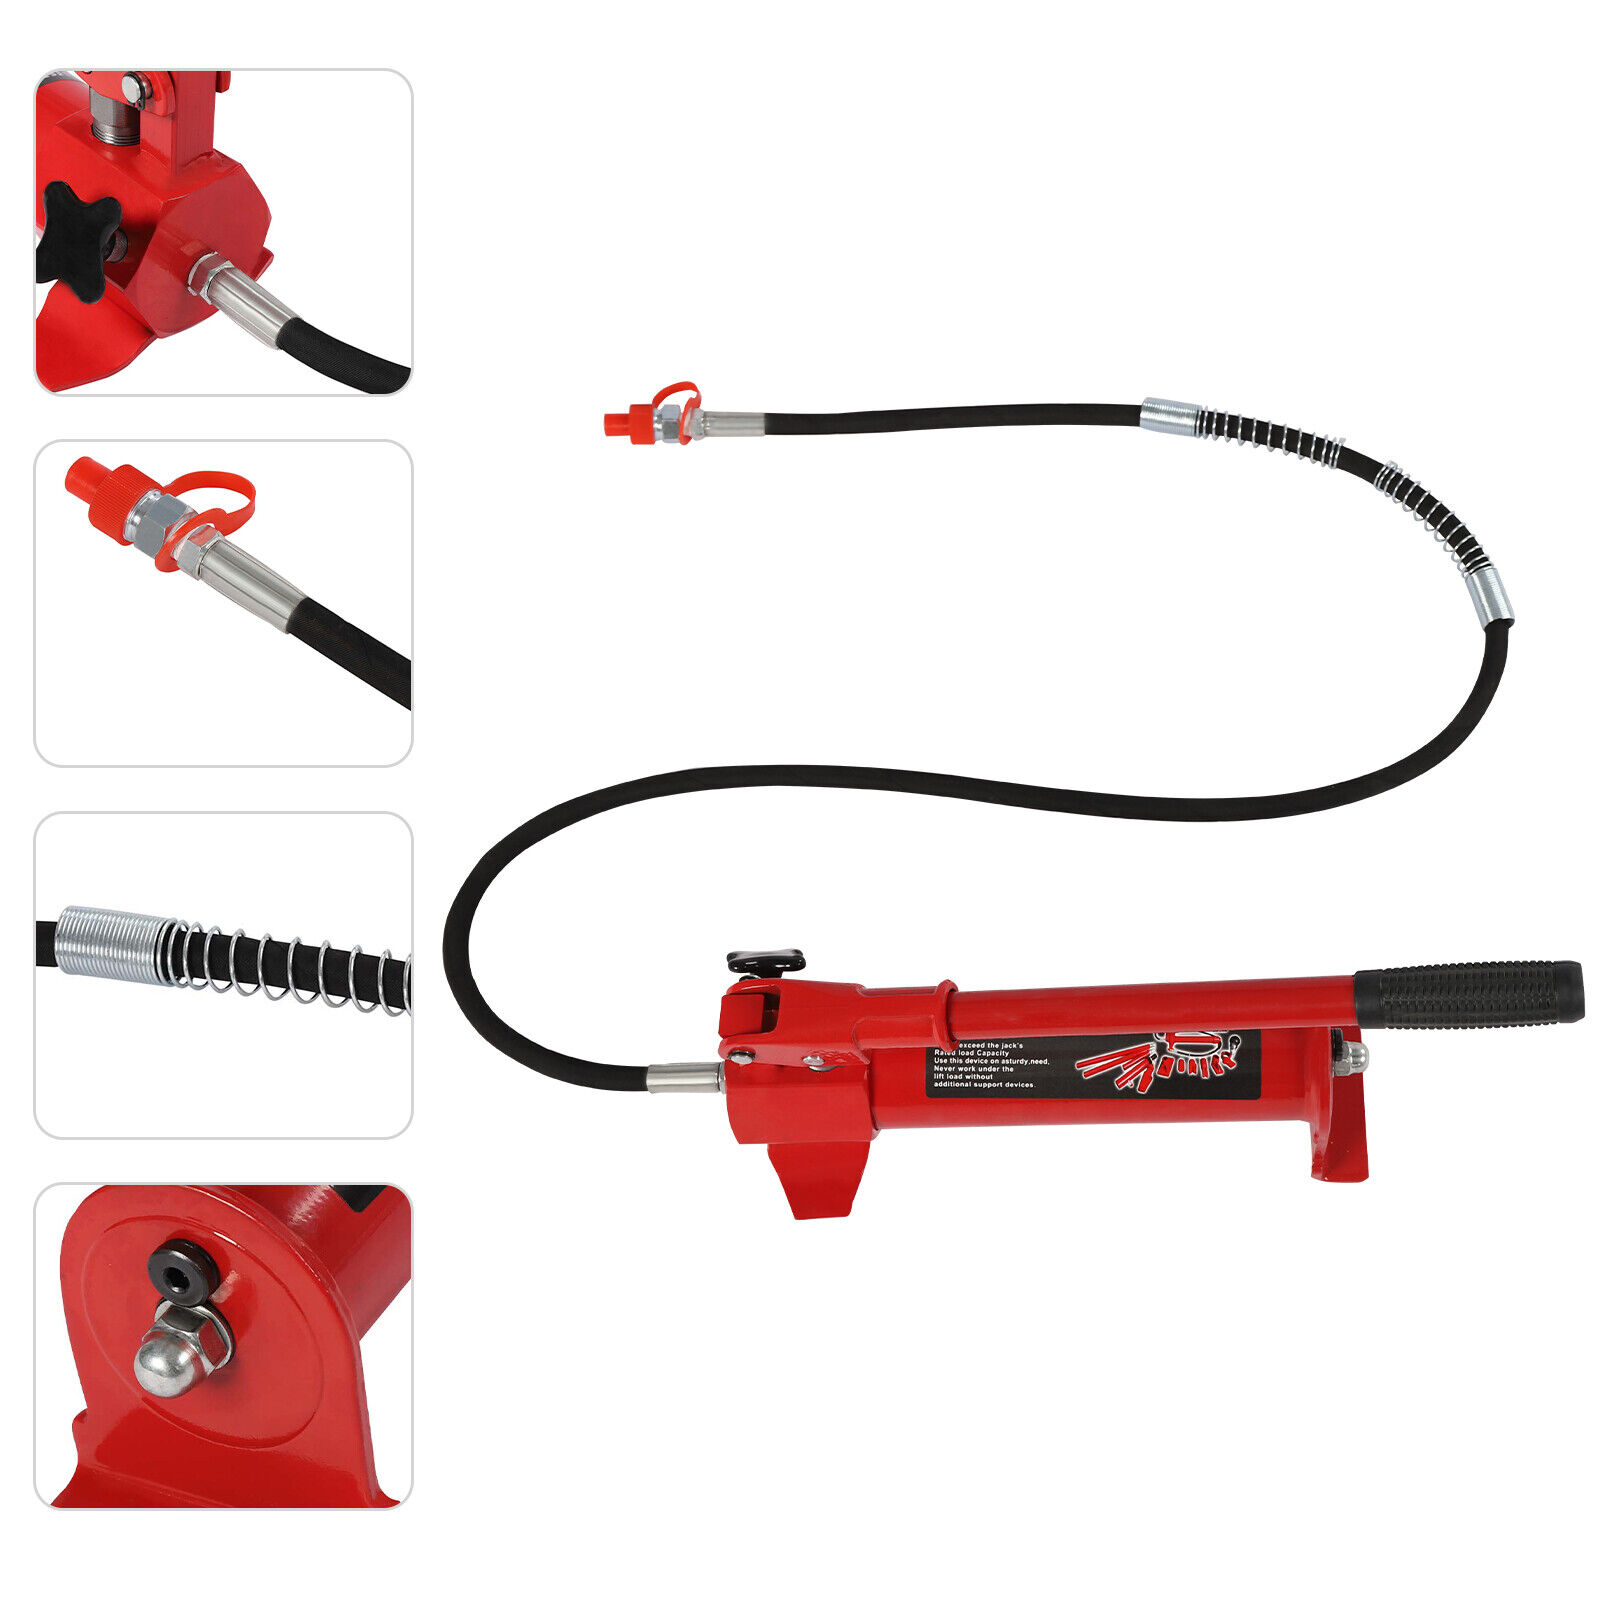 4 Ton Hydraulic Jack Hand Pump Ram For Porta Power Body Shop Tool Replacement